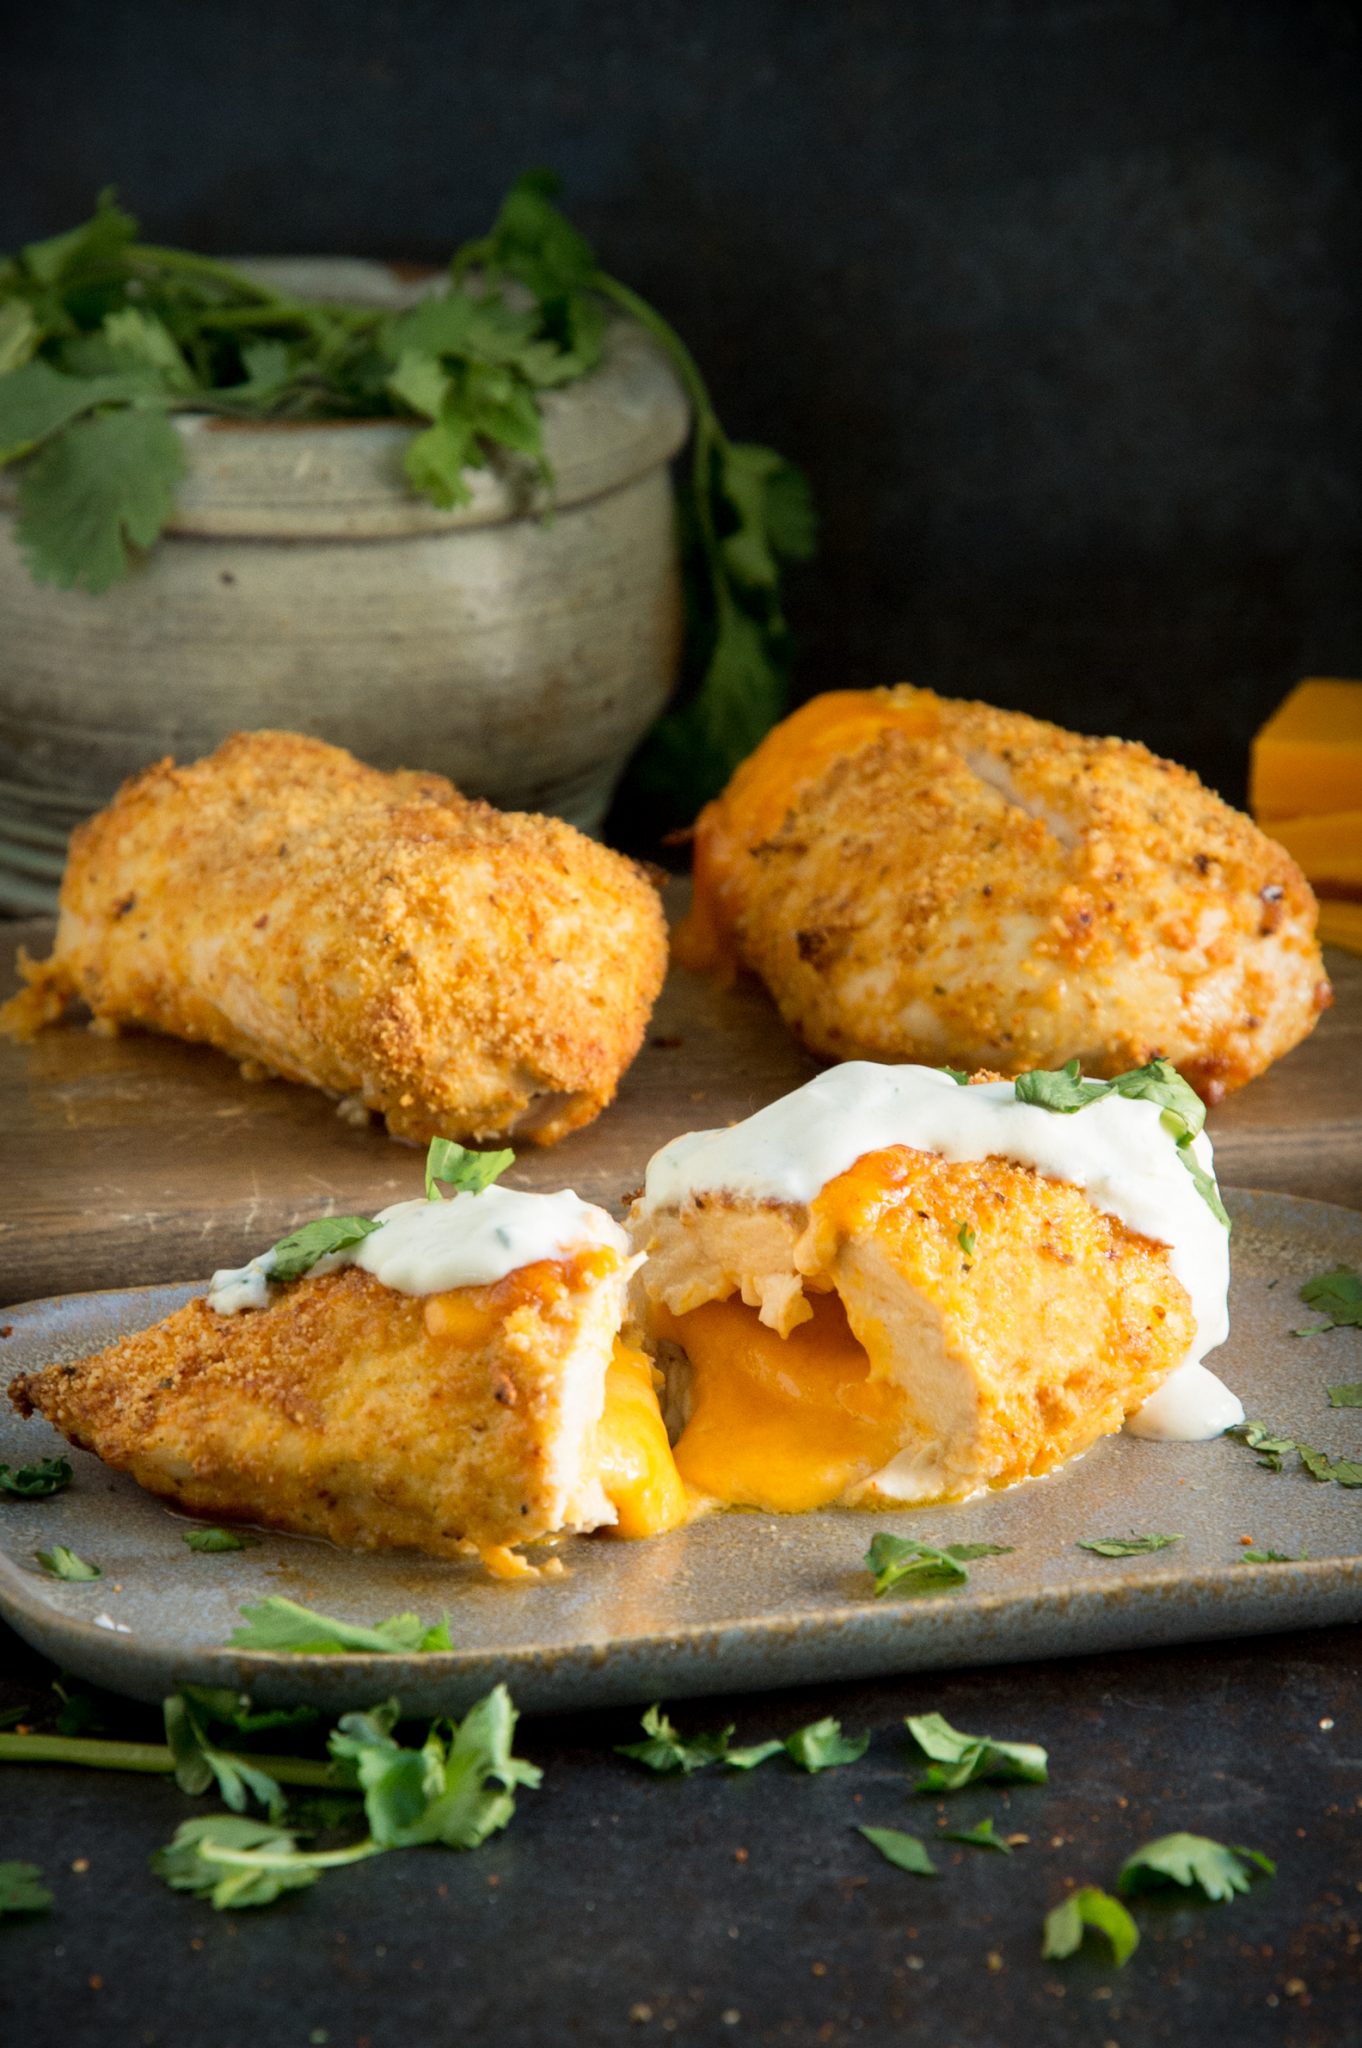 Taco Crusted Cheese Stuffed Chicken Breasts - Simply So Healthy